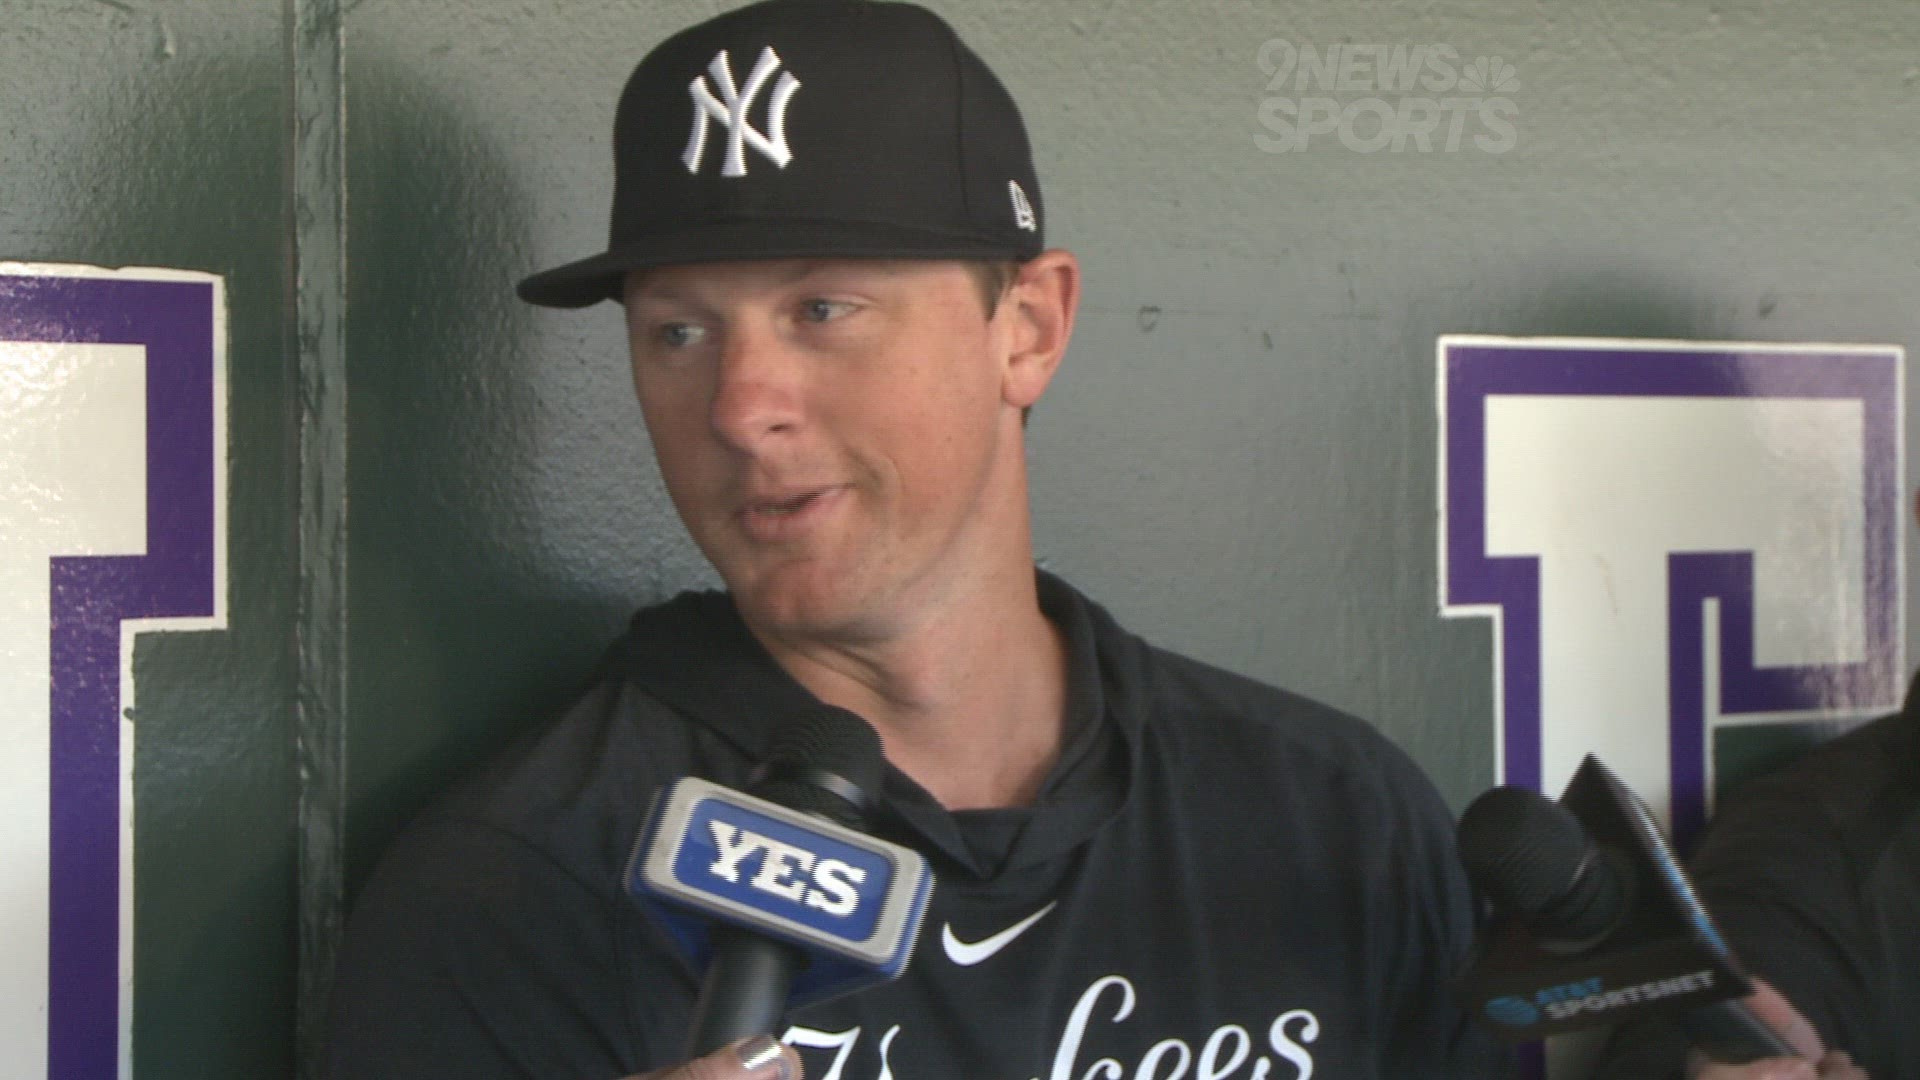 Current Yankees infielder and former Rockies fan favorite DJ LeMahieu makes his return to Coors Field this weekend.